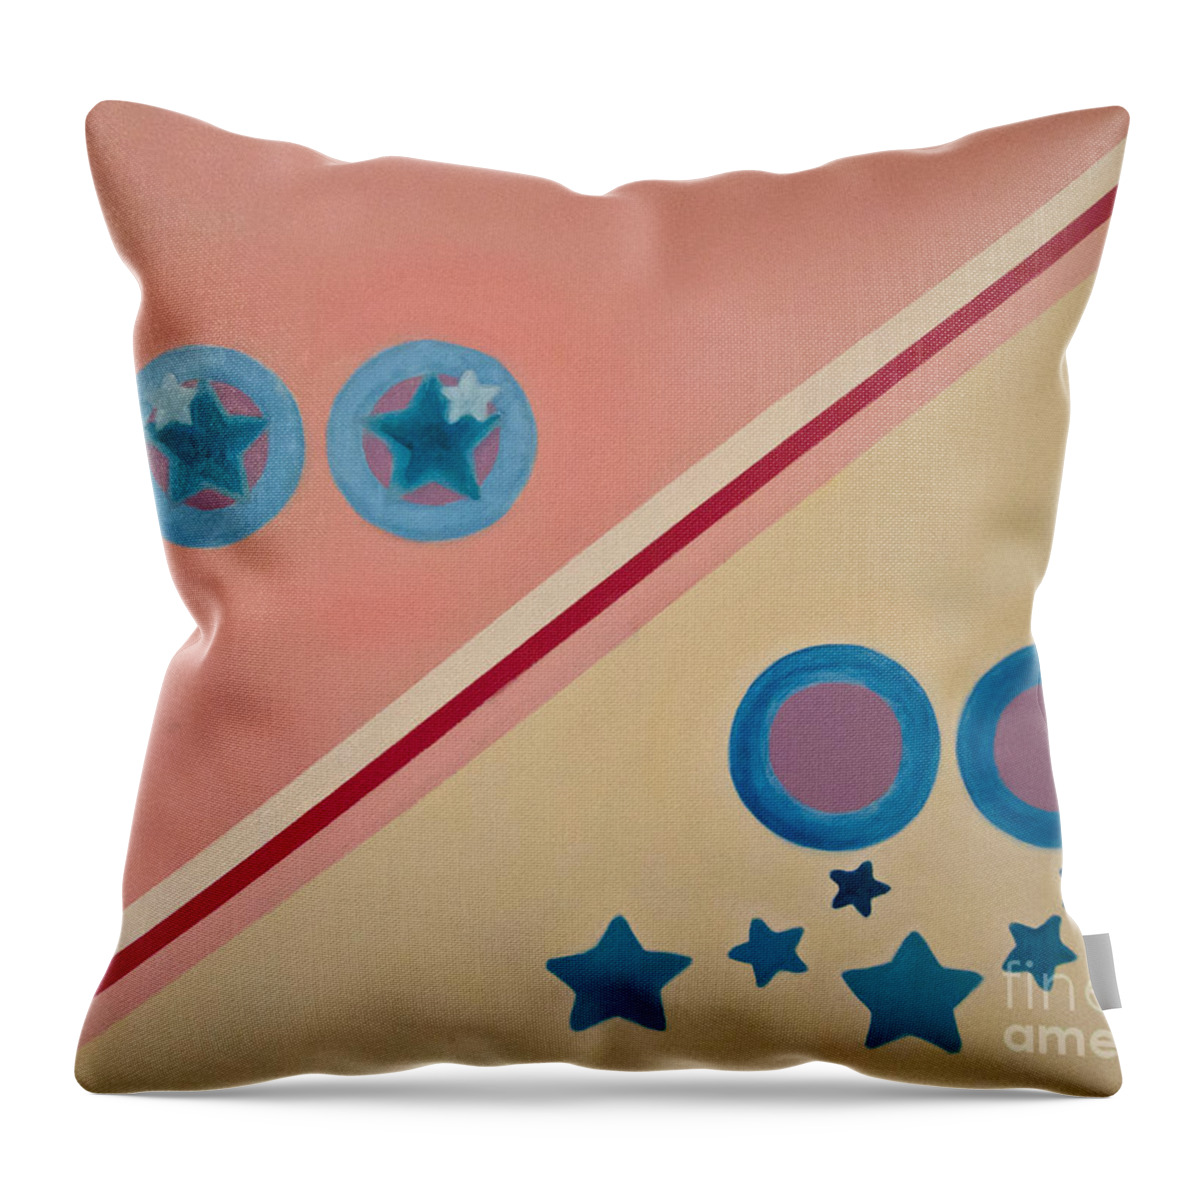 Stars Fell From Her Eyes Throw Pillow featuring the painting Stars Fell From Her Eyes by Karen Francis